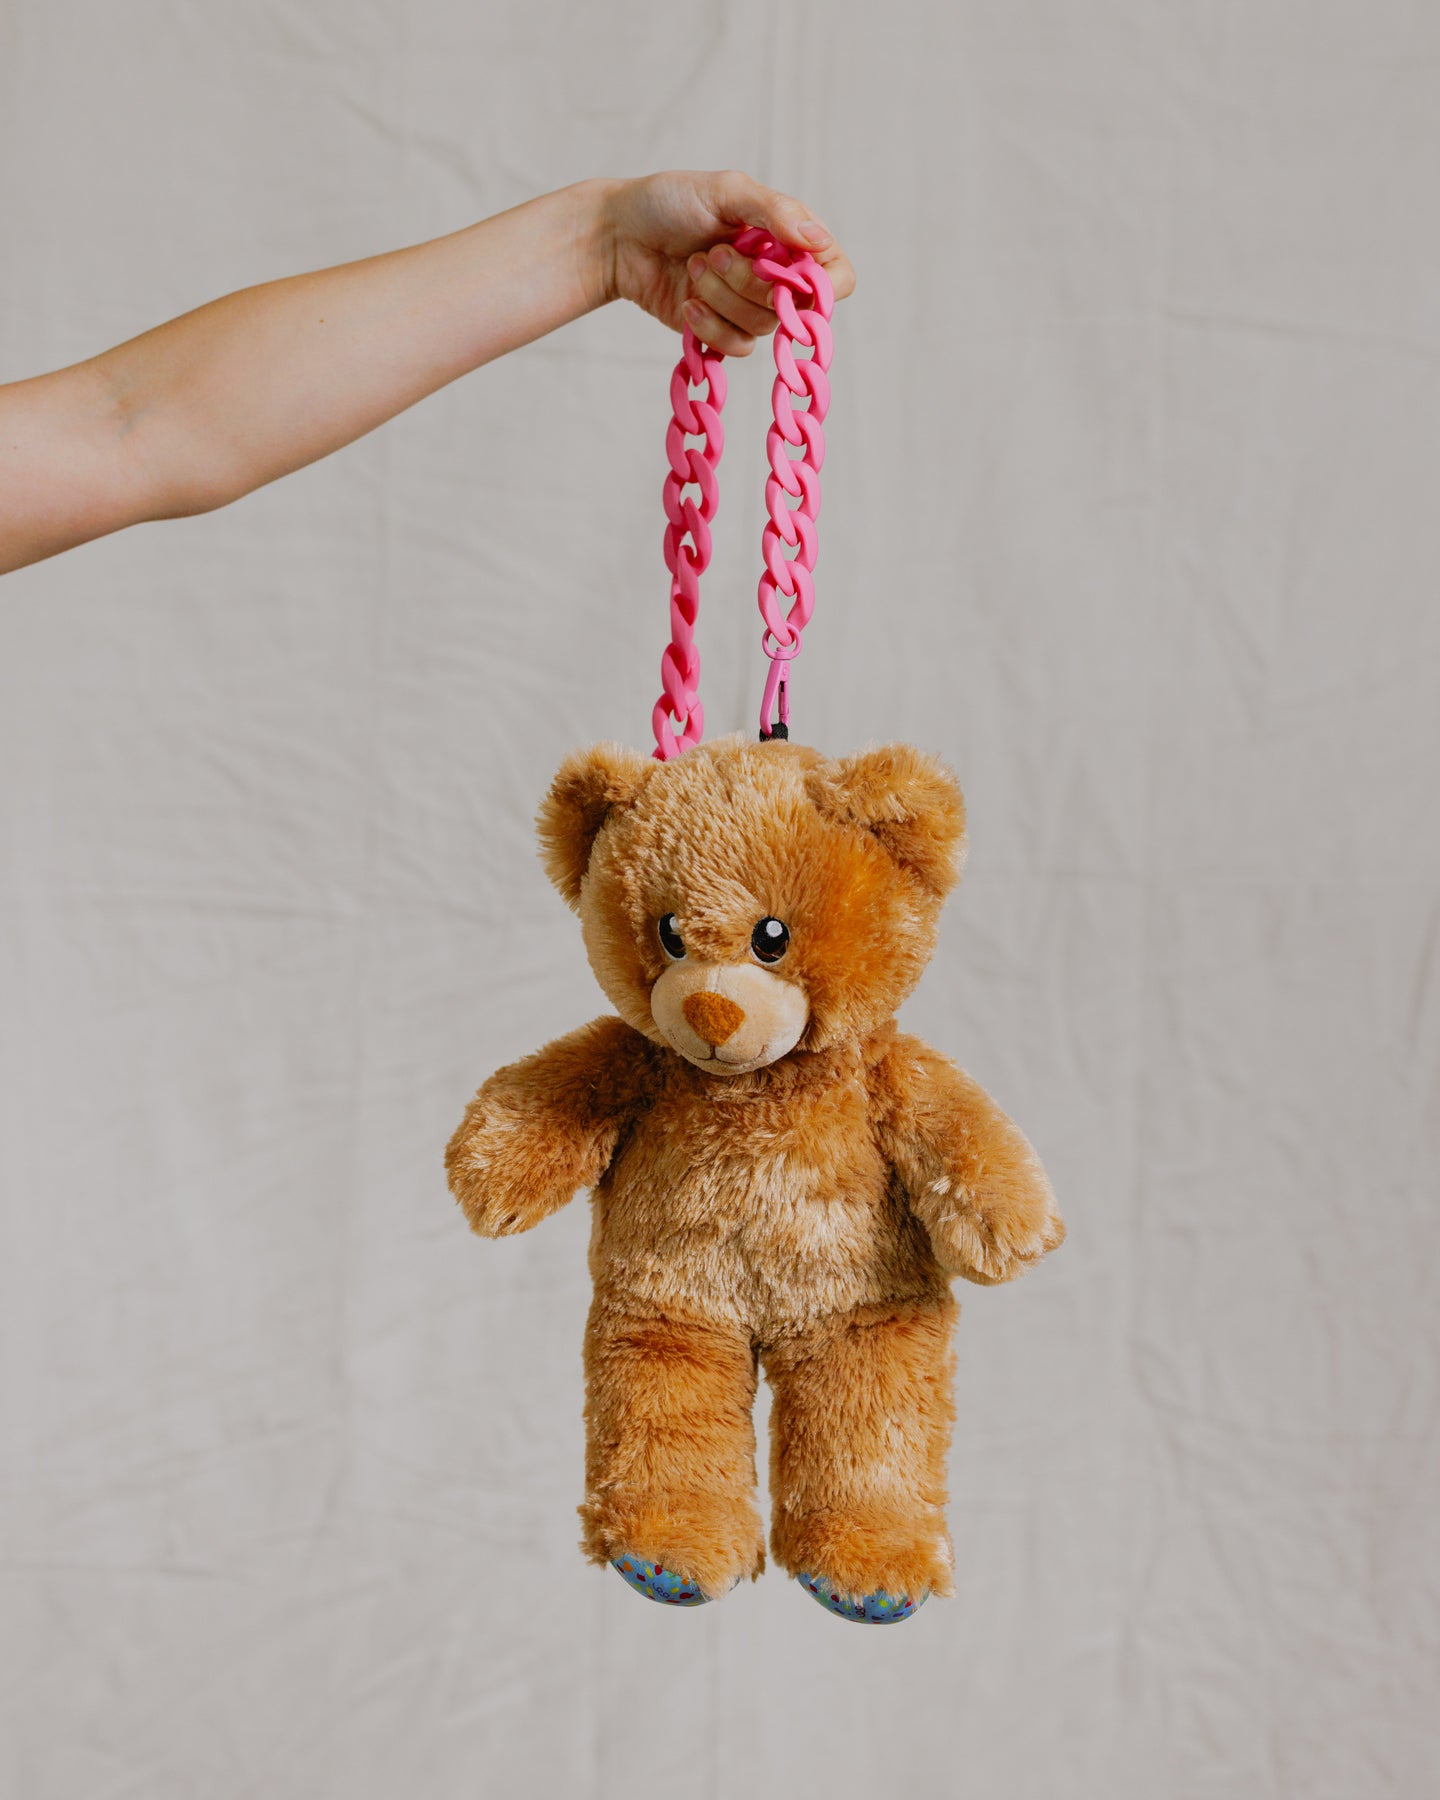 Emotional Support Purse - Lovey the Bear